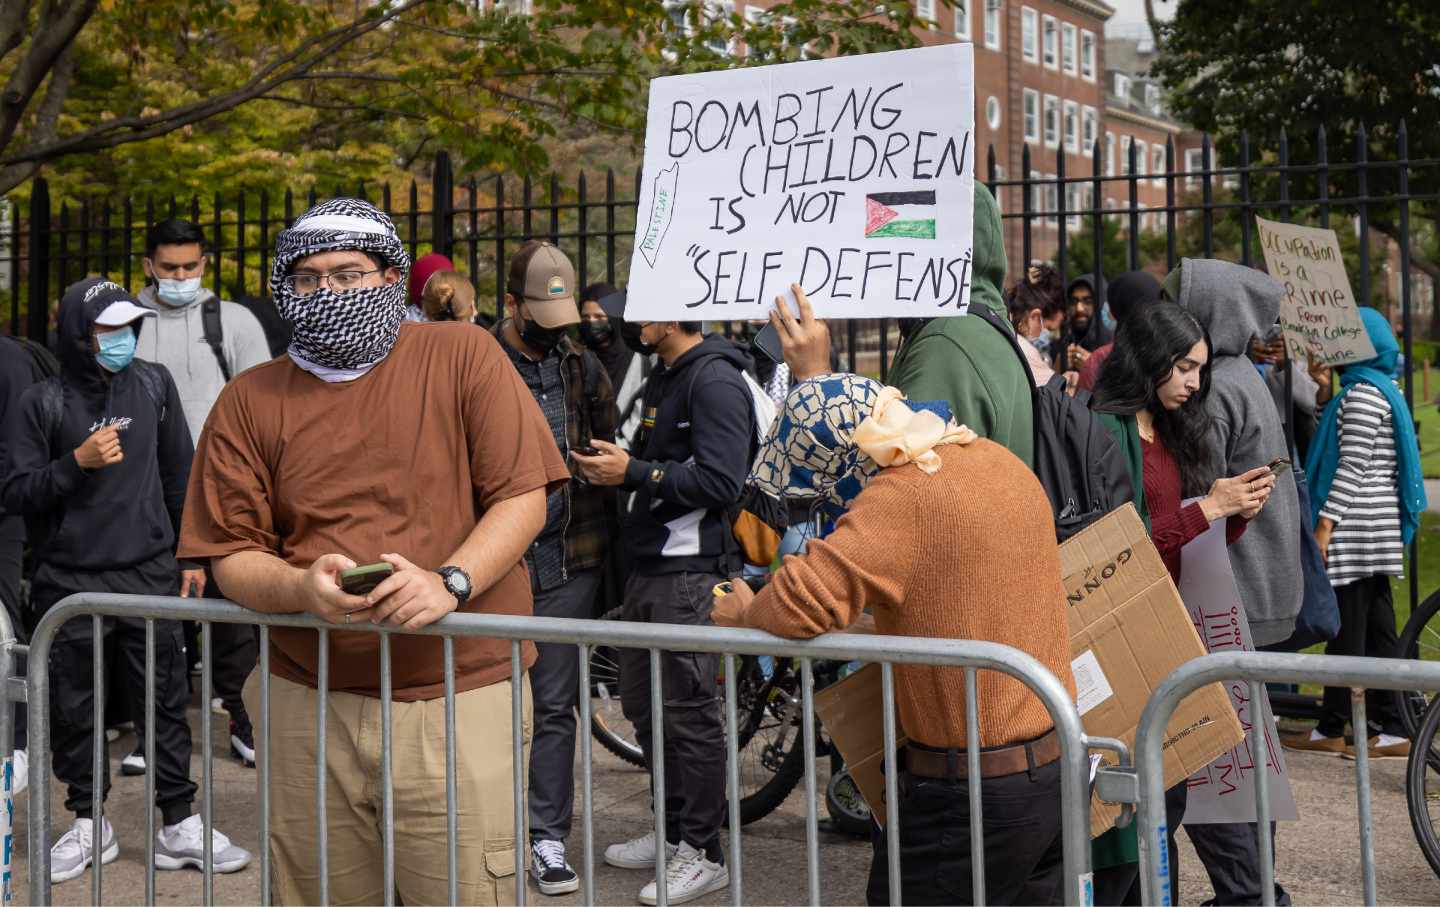 Students from Brooklyn College and supporters hold signs during a pro-Palestinian demonstration at the entrance of the campus.